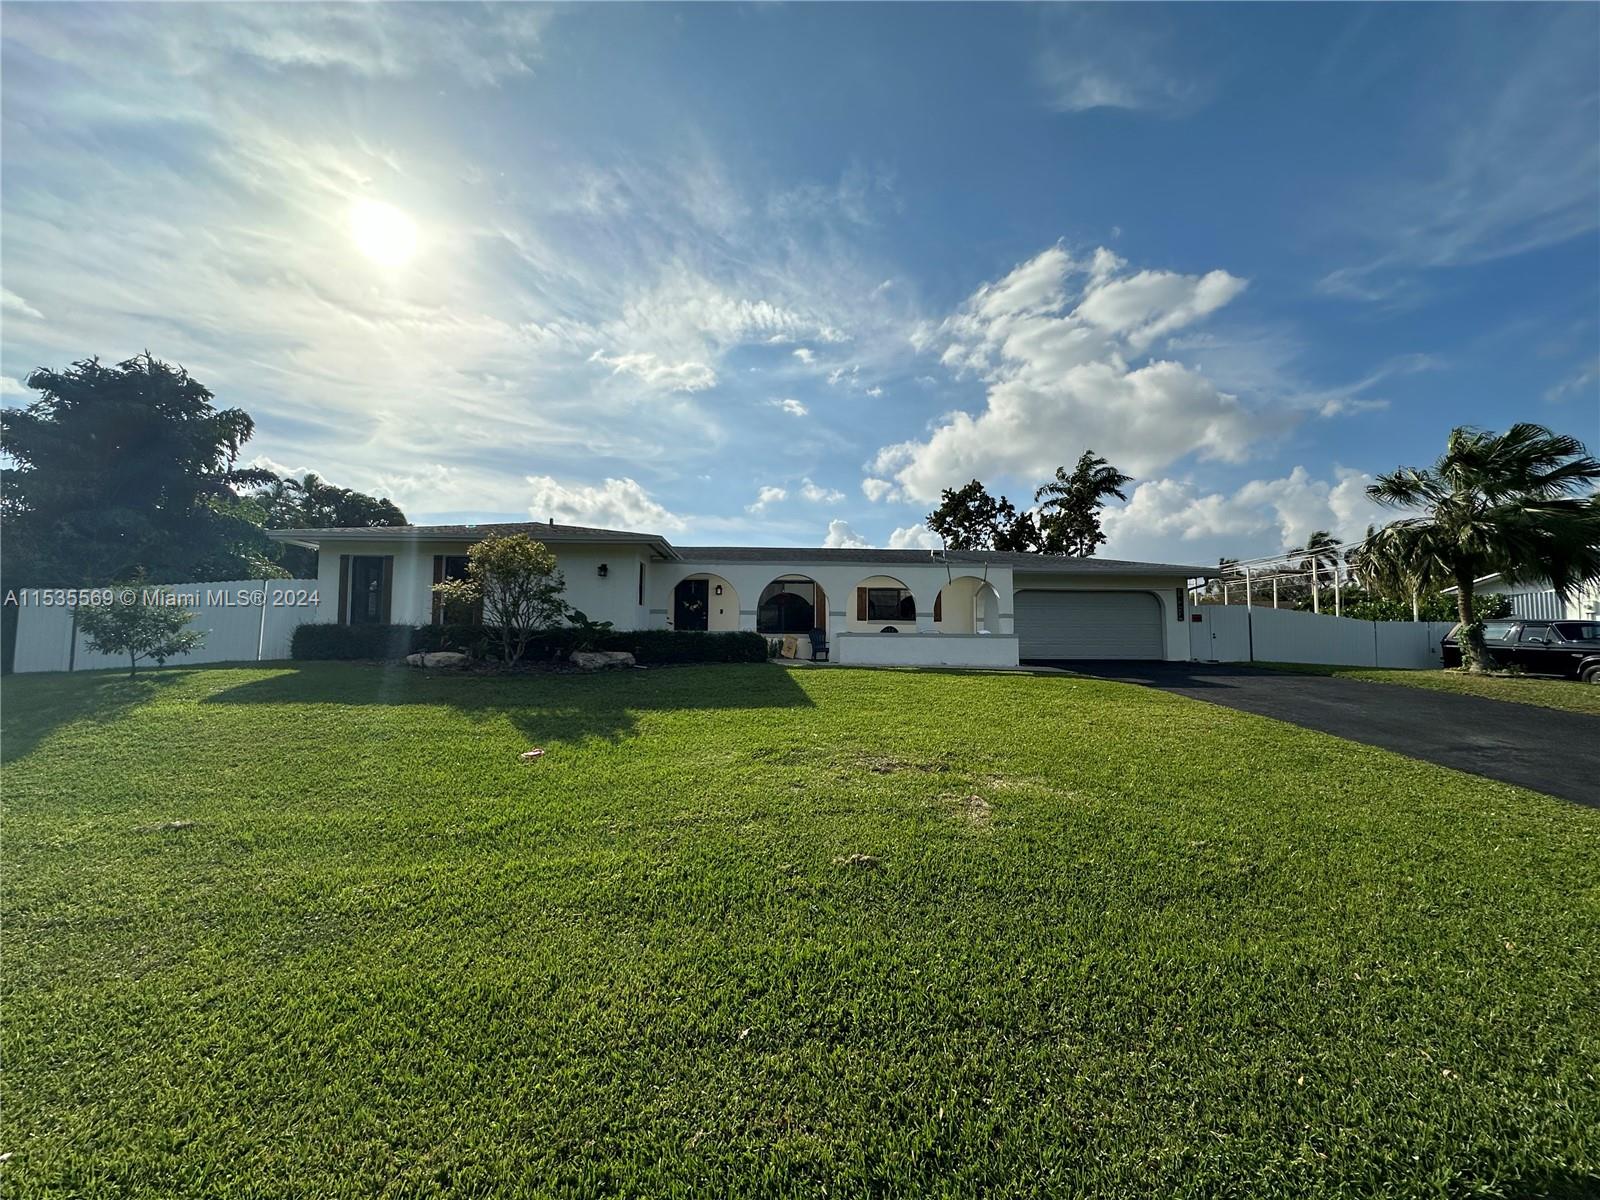 This 3 bedroom, two full bath home sits on a 15,246 Sq Ft lot in Cutler Bay! Conveniently located off of 184th Street and 87th ave. The home offers a large concrete slab to park a boat or RV, impact windows and doors throughout, stainless steel appliances, quarts countertops, city gas, city water / sewer, at&t fiber, water softening system, pvc pipes throughout and much more! Easy to show with a timely notice.